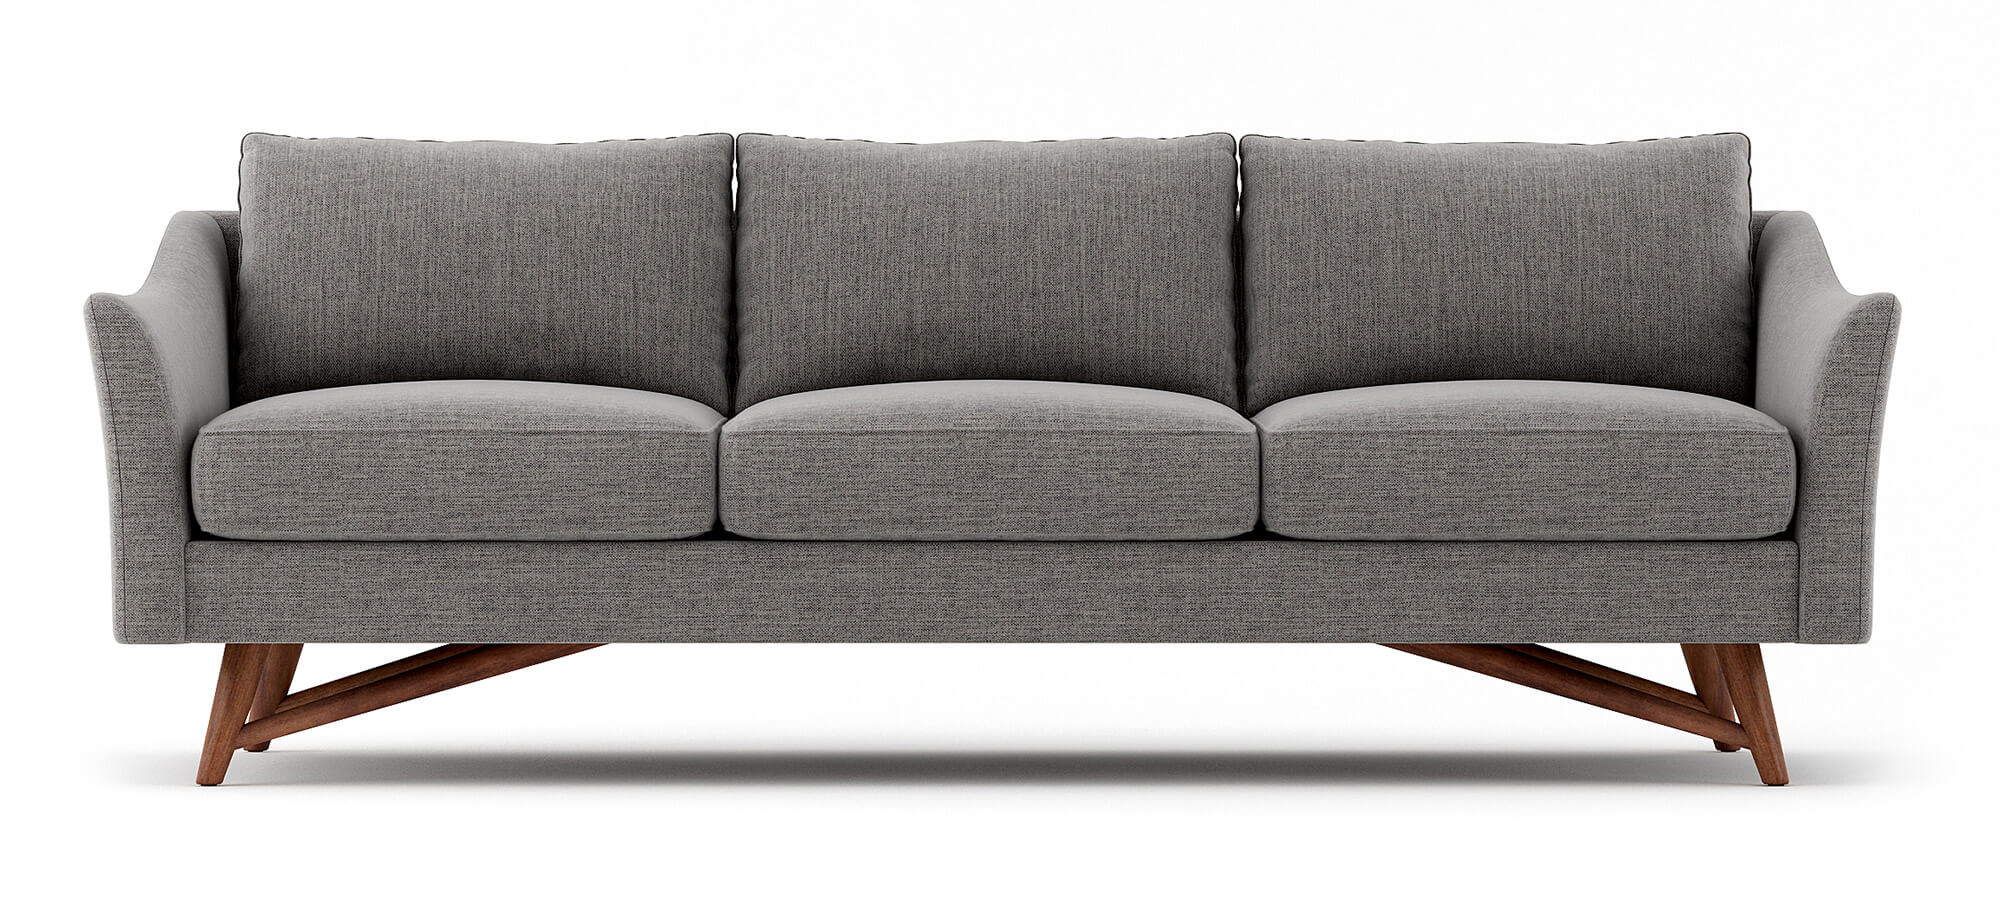 G: Shown in Smart Aluminum fabric and walnut base